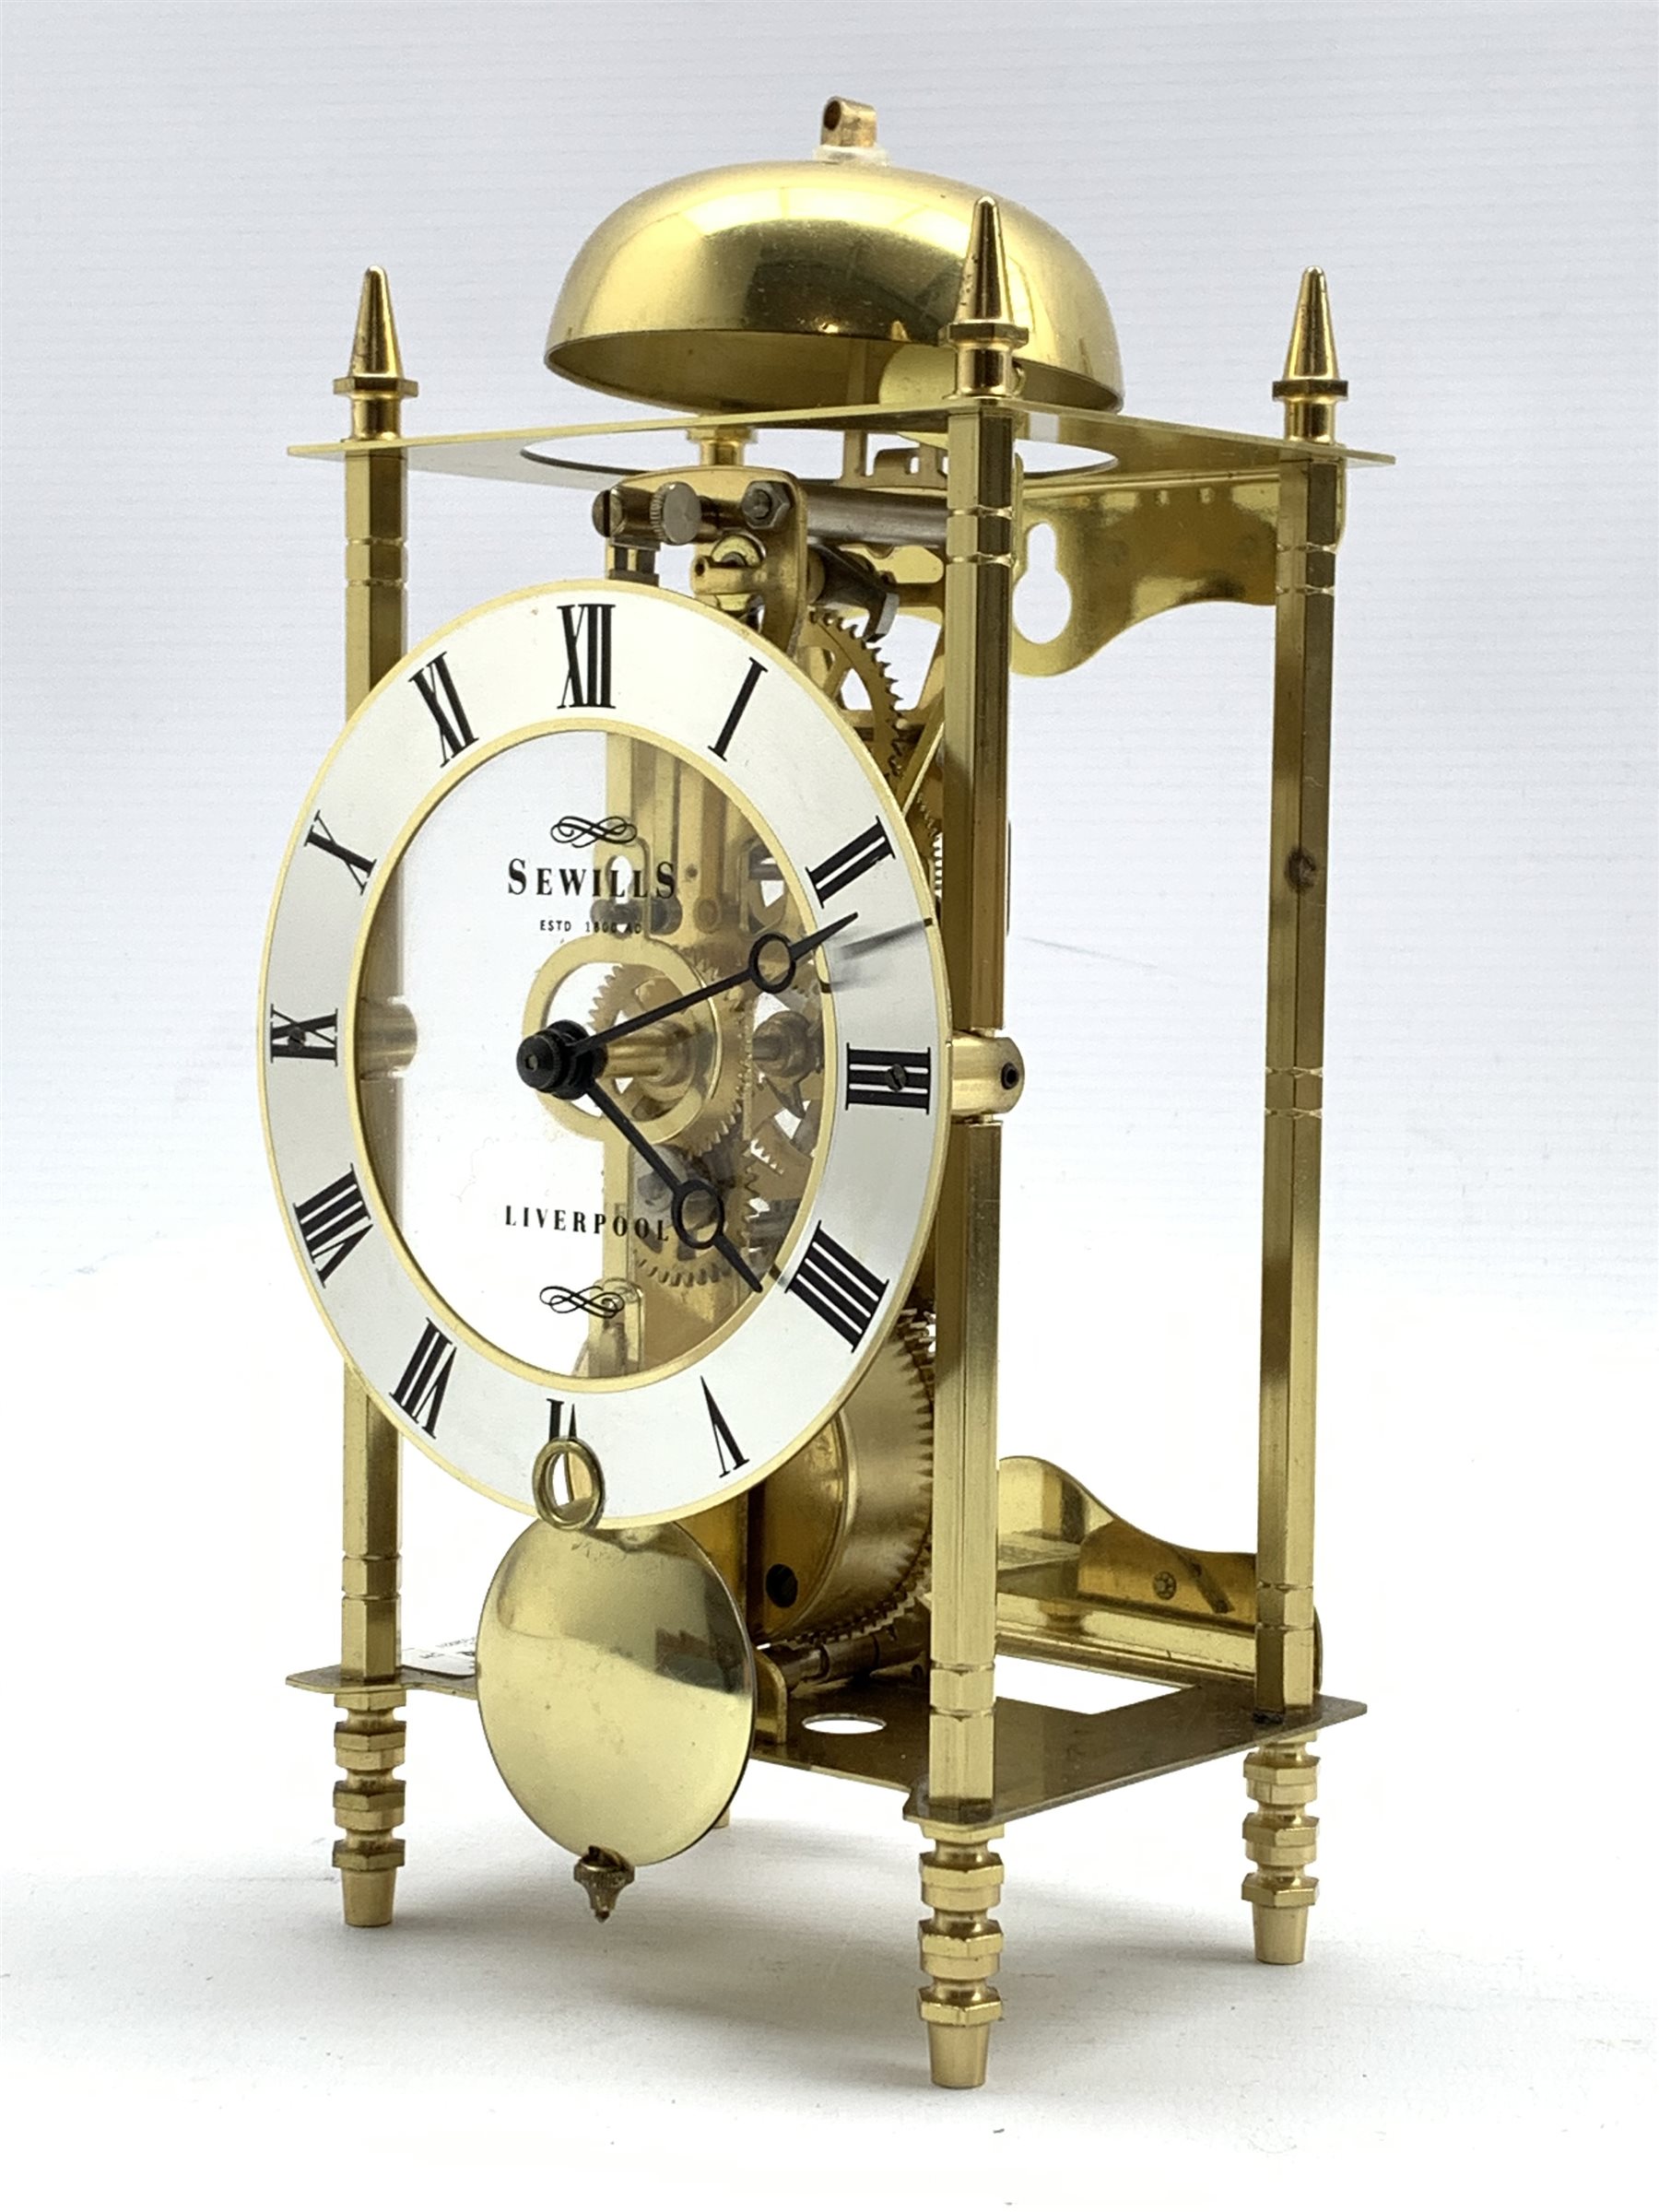 Sewills of Liverpool brass skeleton lantern clock, 30 hour movement with passing strike, silvered di